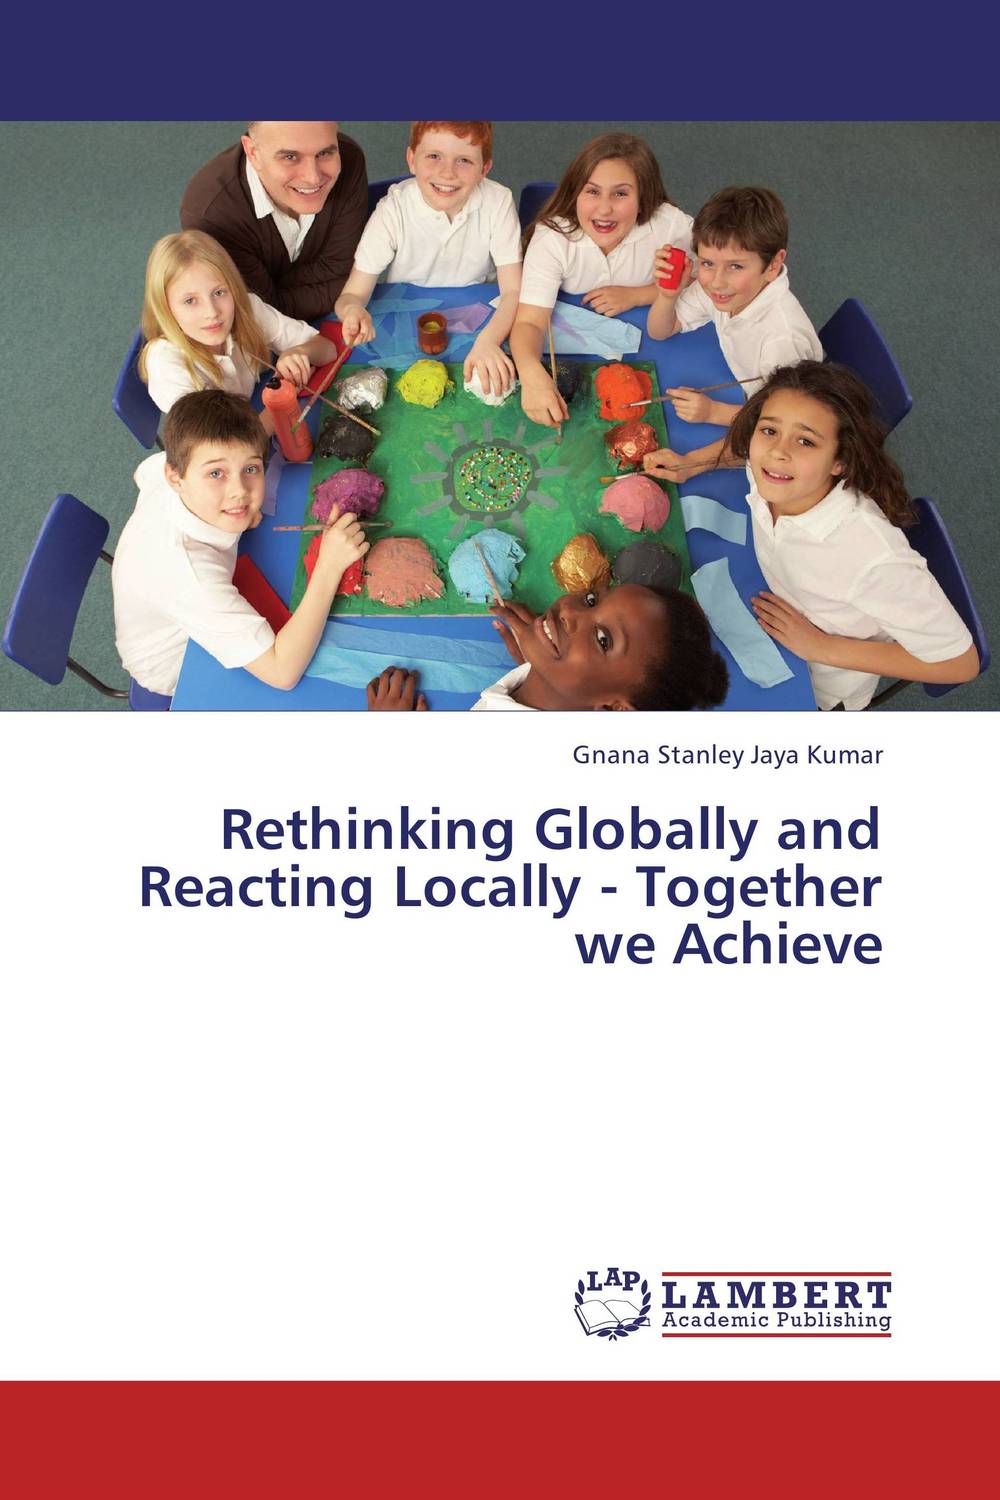 Rethinking Globally and Reacting Locally - Together we Achieve